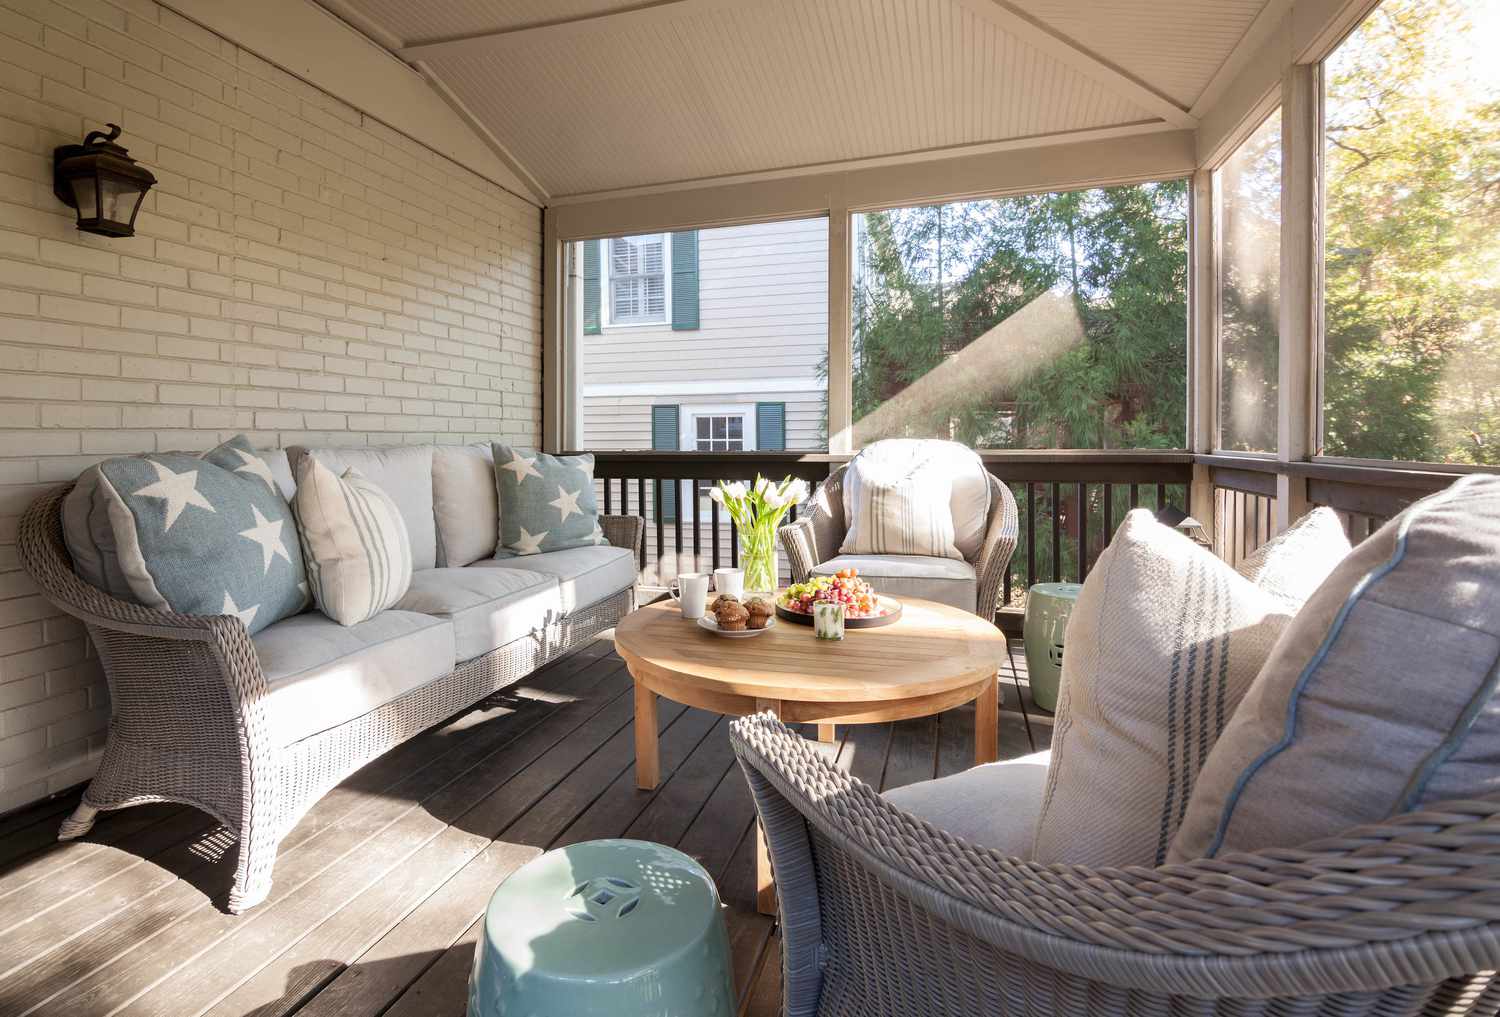 Screened in porch with rotan seating arrangement